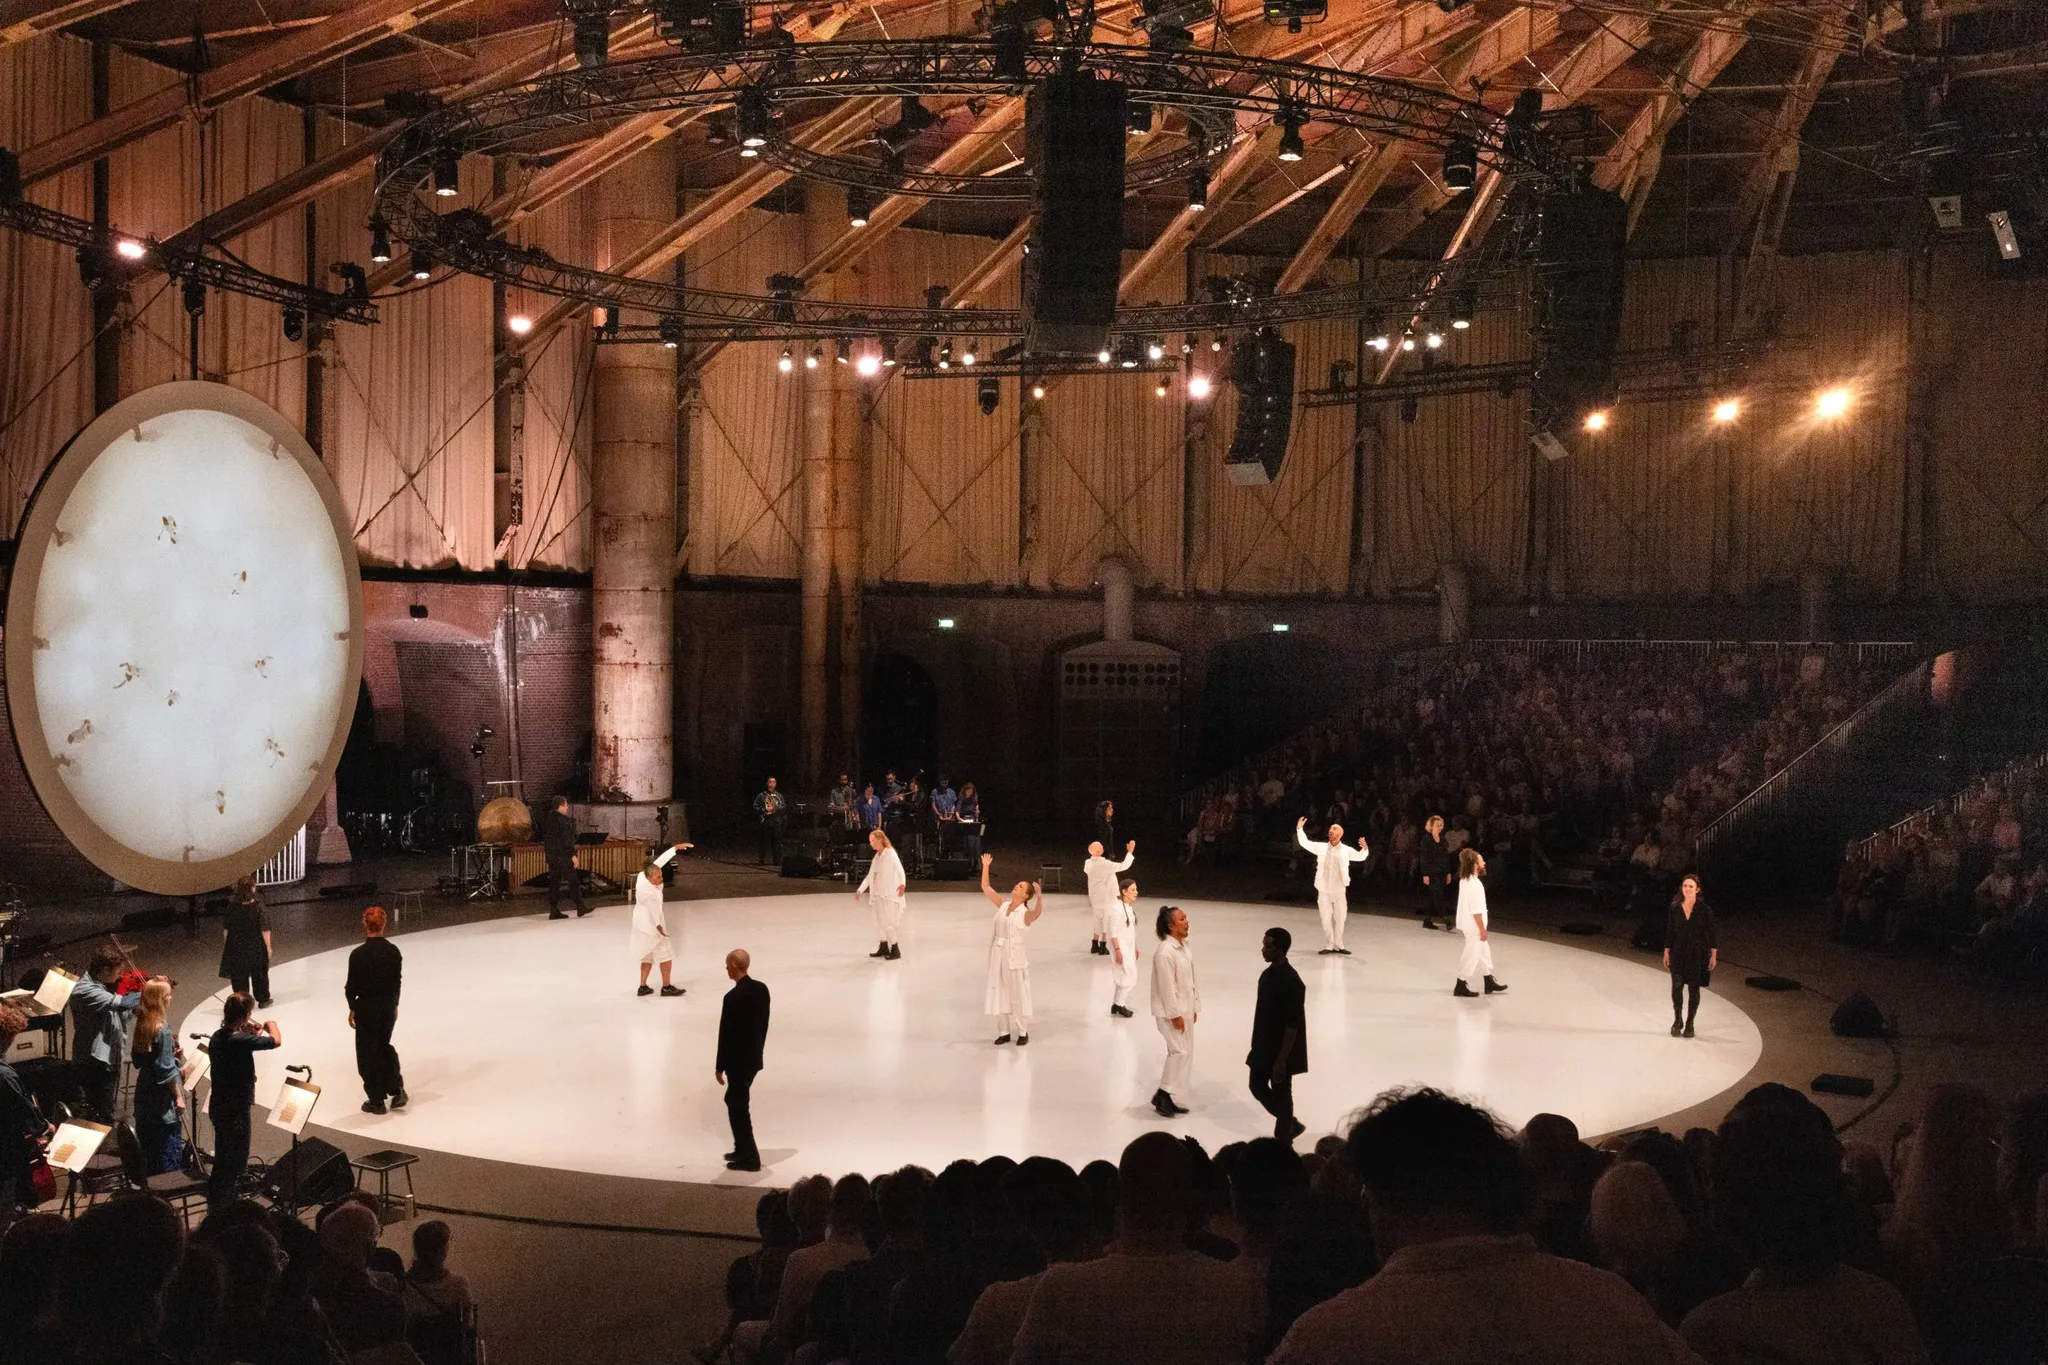 Performers dressed in white and other dressed in black in a circular formation, surrounded by musicians in a former gas holder building.